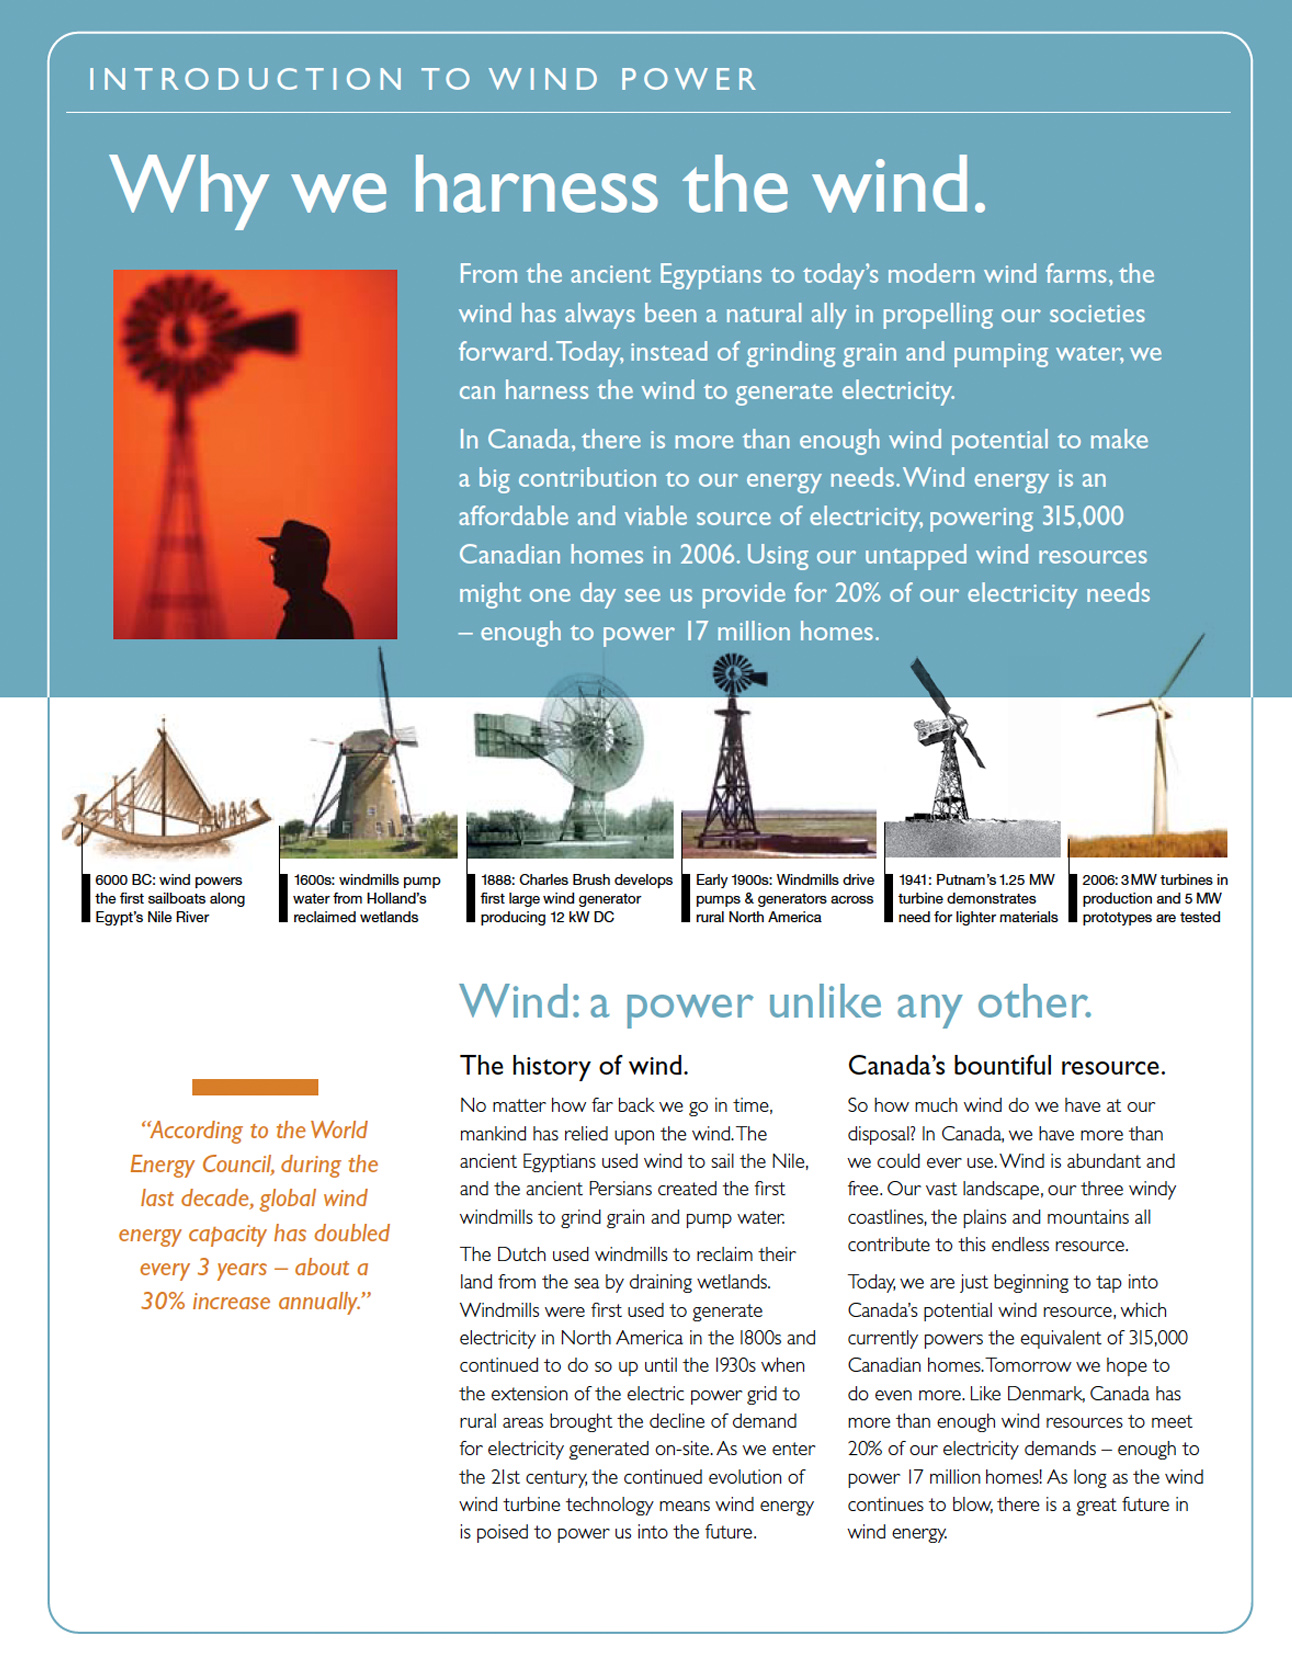 renewable energy infographics are peppered throughout this comprehensive information kit on wind energy in Canada